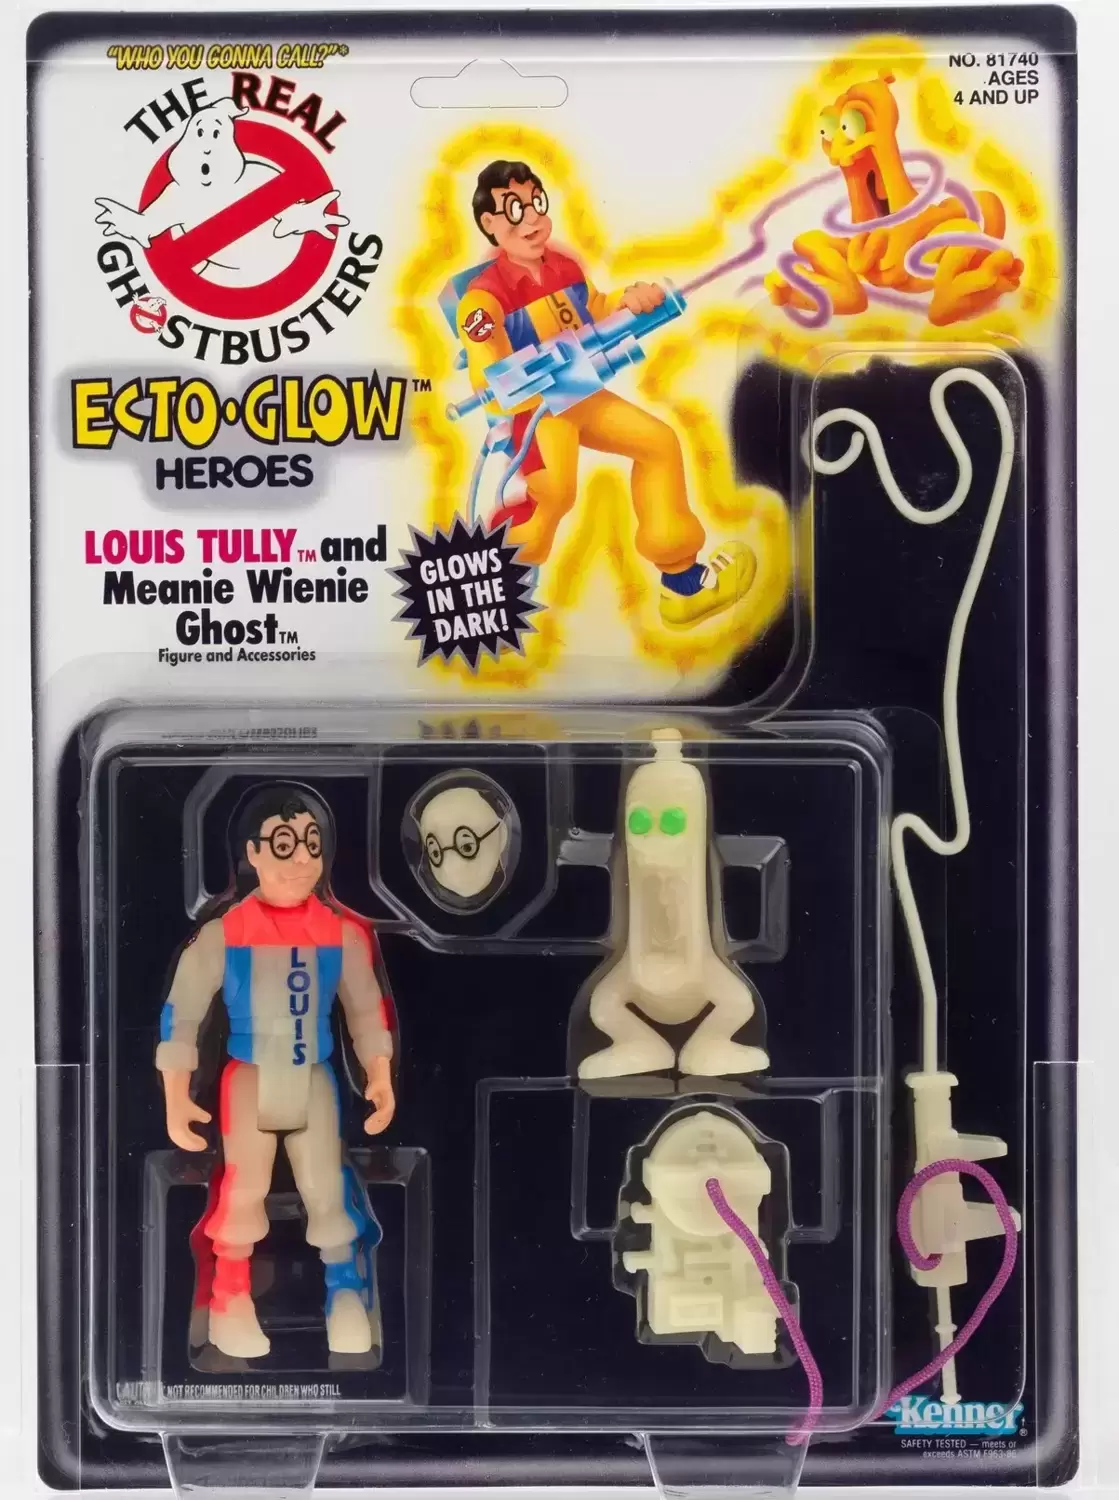 real ghostbusters louis